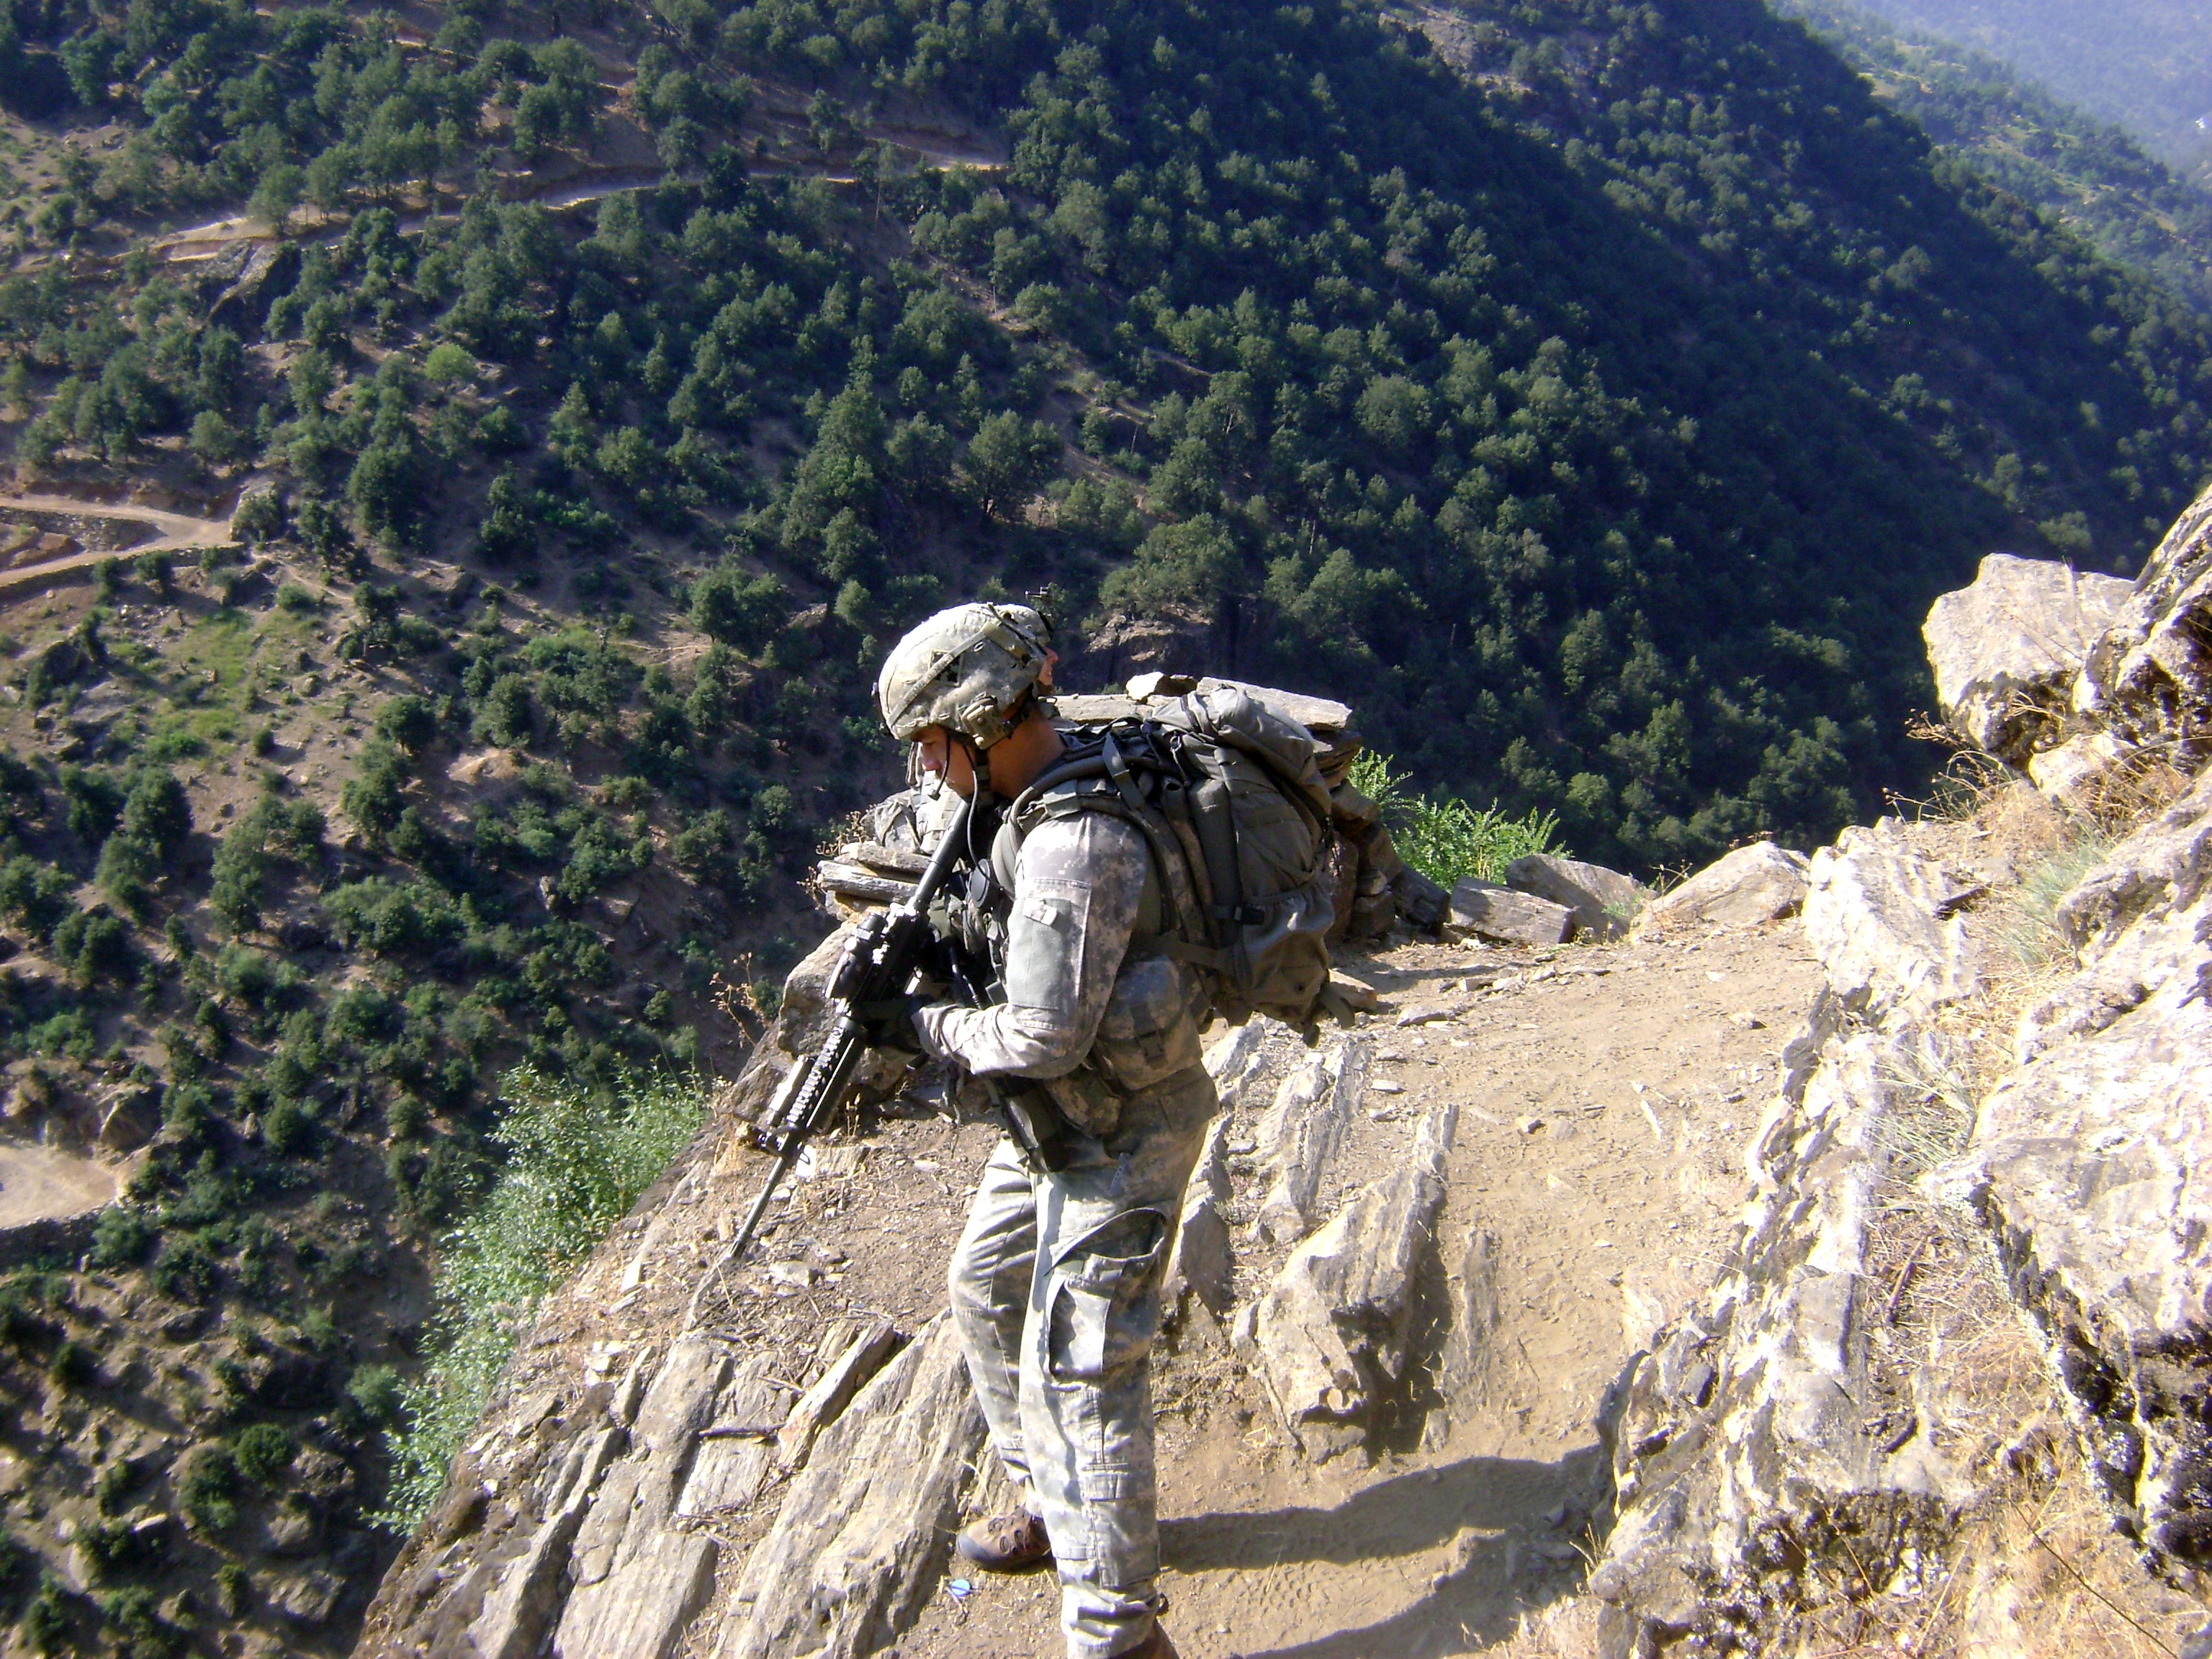 In this file photo dated July 27, 2009, U.S. Army Staff Sgt. Clinton L. Romesha patrols near Combat Outpost (COP) Keating in Kamdesh, Nuristan province, Afghanistan. Former Staff Sgt. Romesha was awarded the Medal of Honor Feb. 11, 2013, for actions during the Battle of Kamdesh at COP Keating, Nuristan province, Afghanistan, Oct. 3, 2009. Romesha was a section leader with Bravo Troop, 3rd Squadron, 61st Cavalry Regiment, 4th Brigade Combat Team, 4th Infantry Division at the time of the battle. (DoD photo/Released)